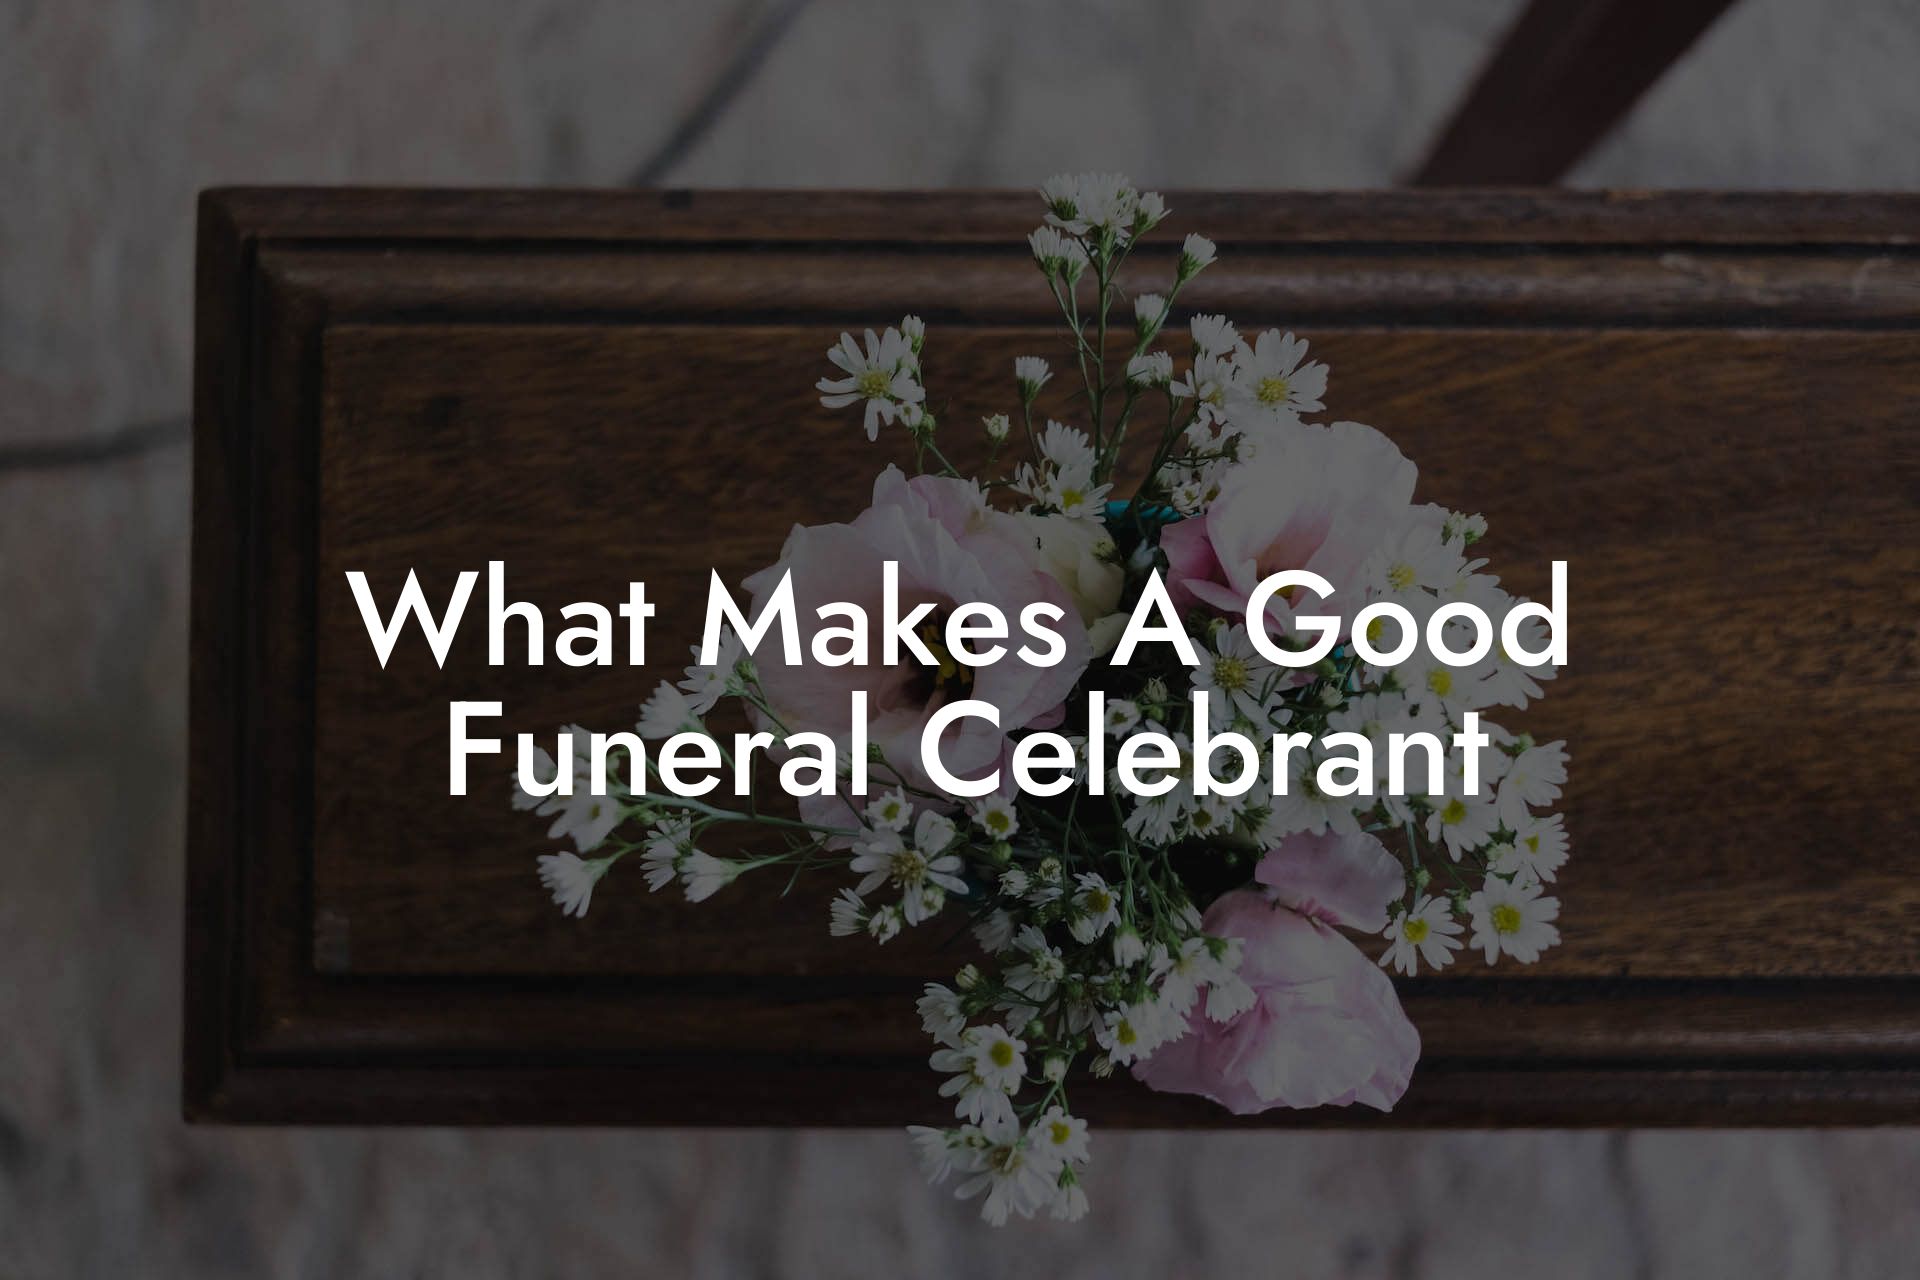 What Makes A Good Funeral Celebrant